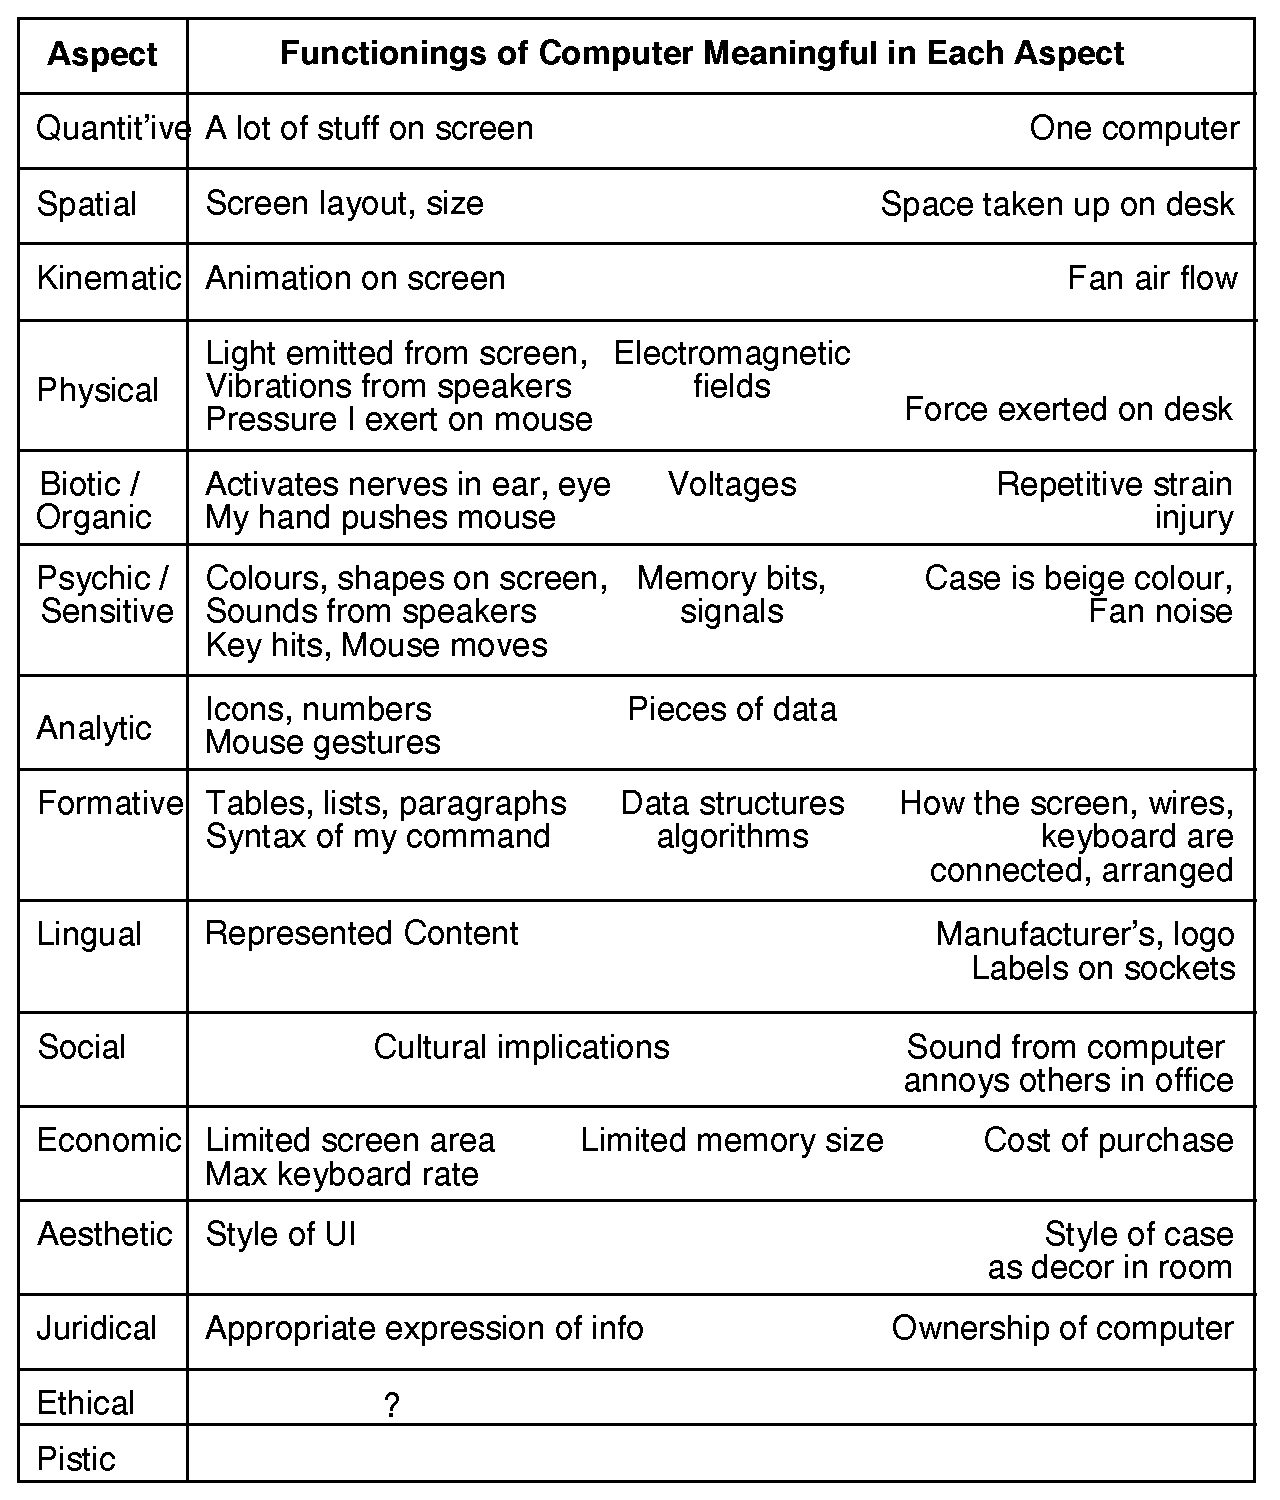 Aspects of computer 1280,1500